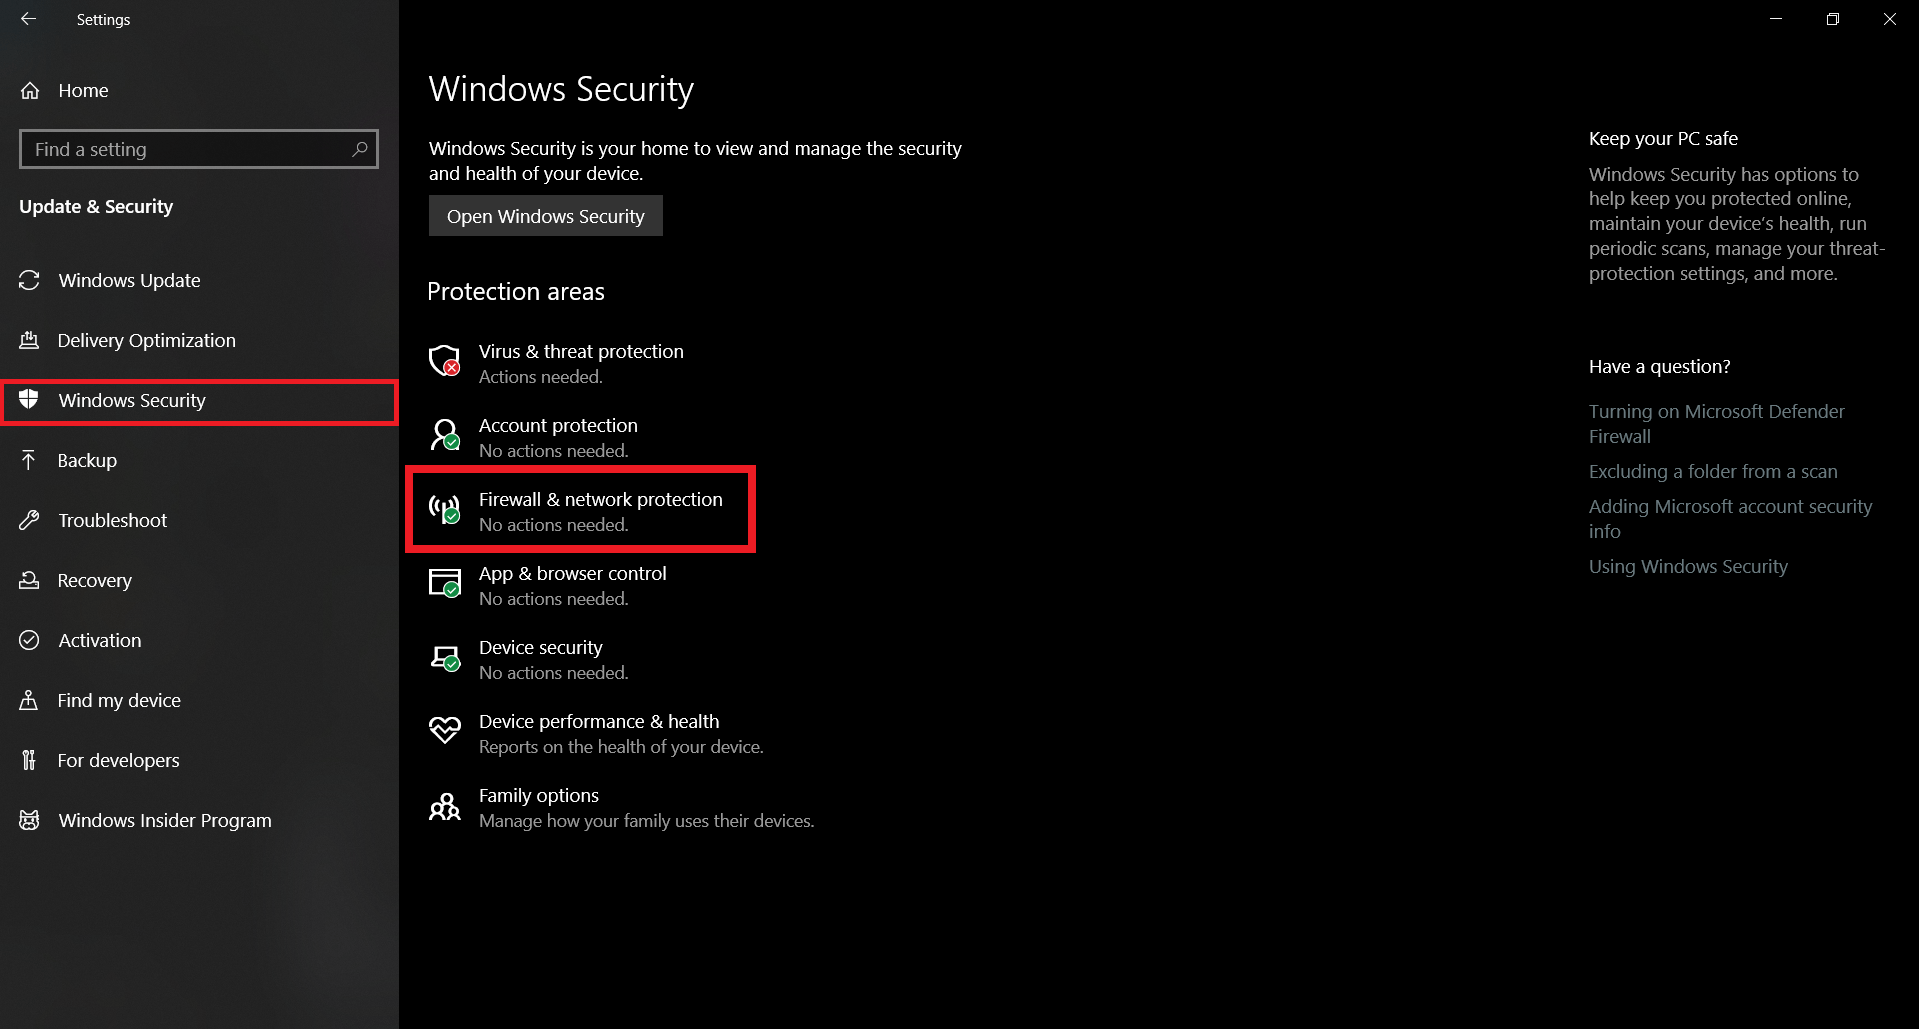 Firewall and Network Protection on Windows 10